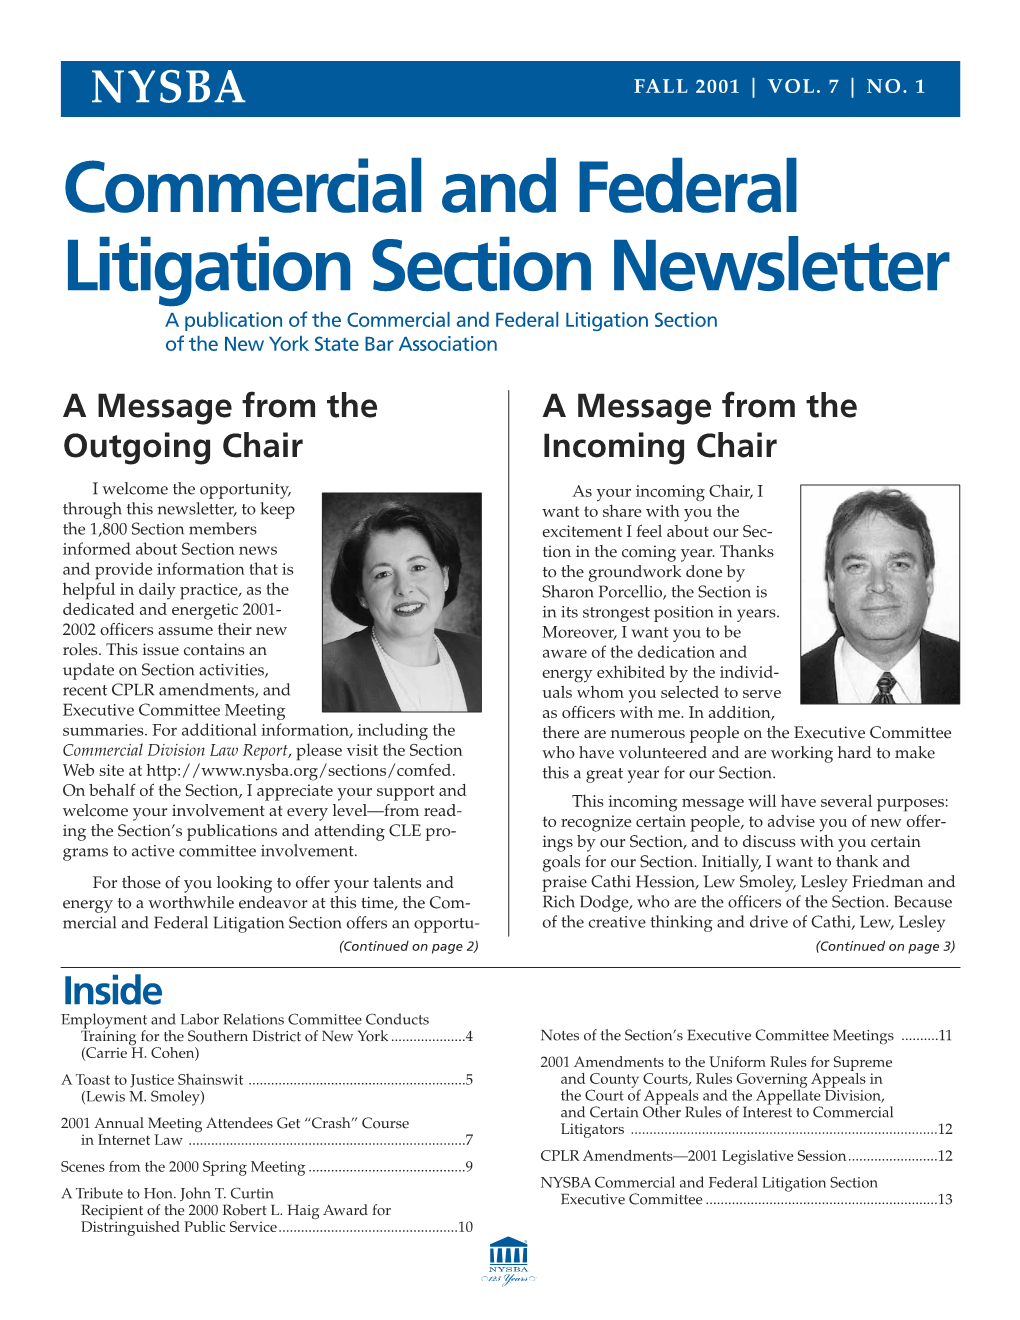 Commercial and Federal Litigation Section Newsletter a Publication of the Commercial and Federal Litigation Section of the New York State Bar Association